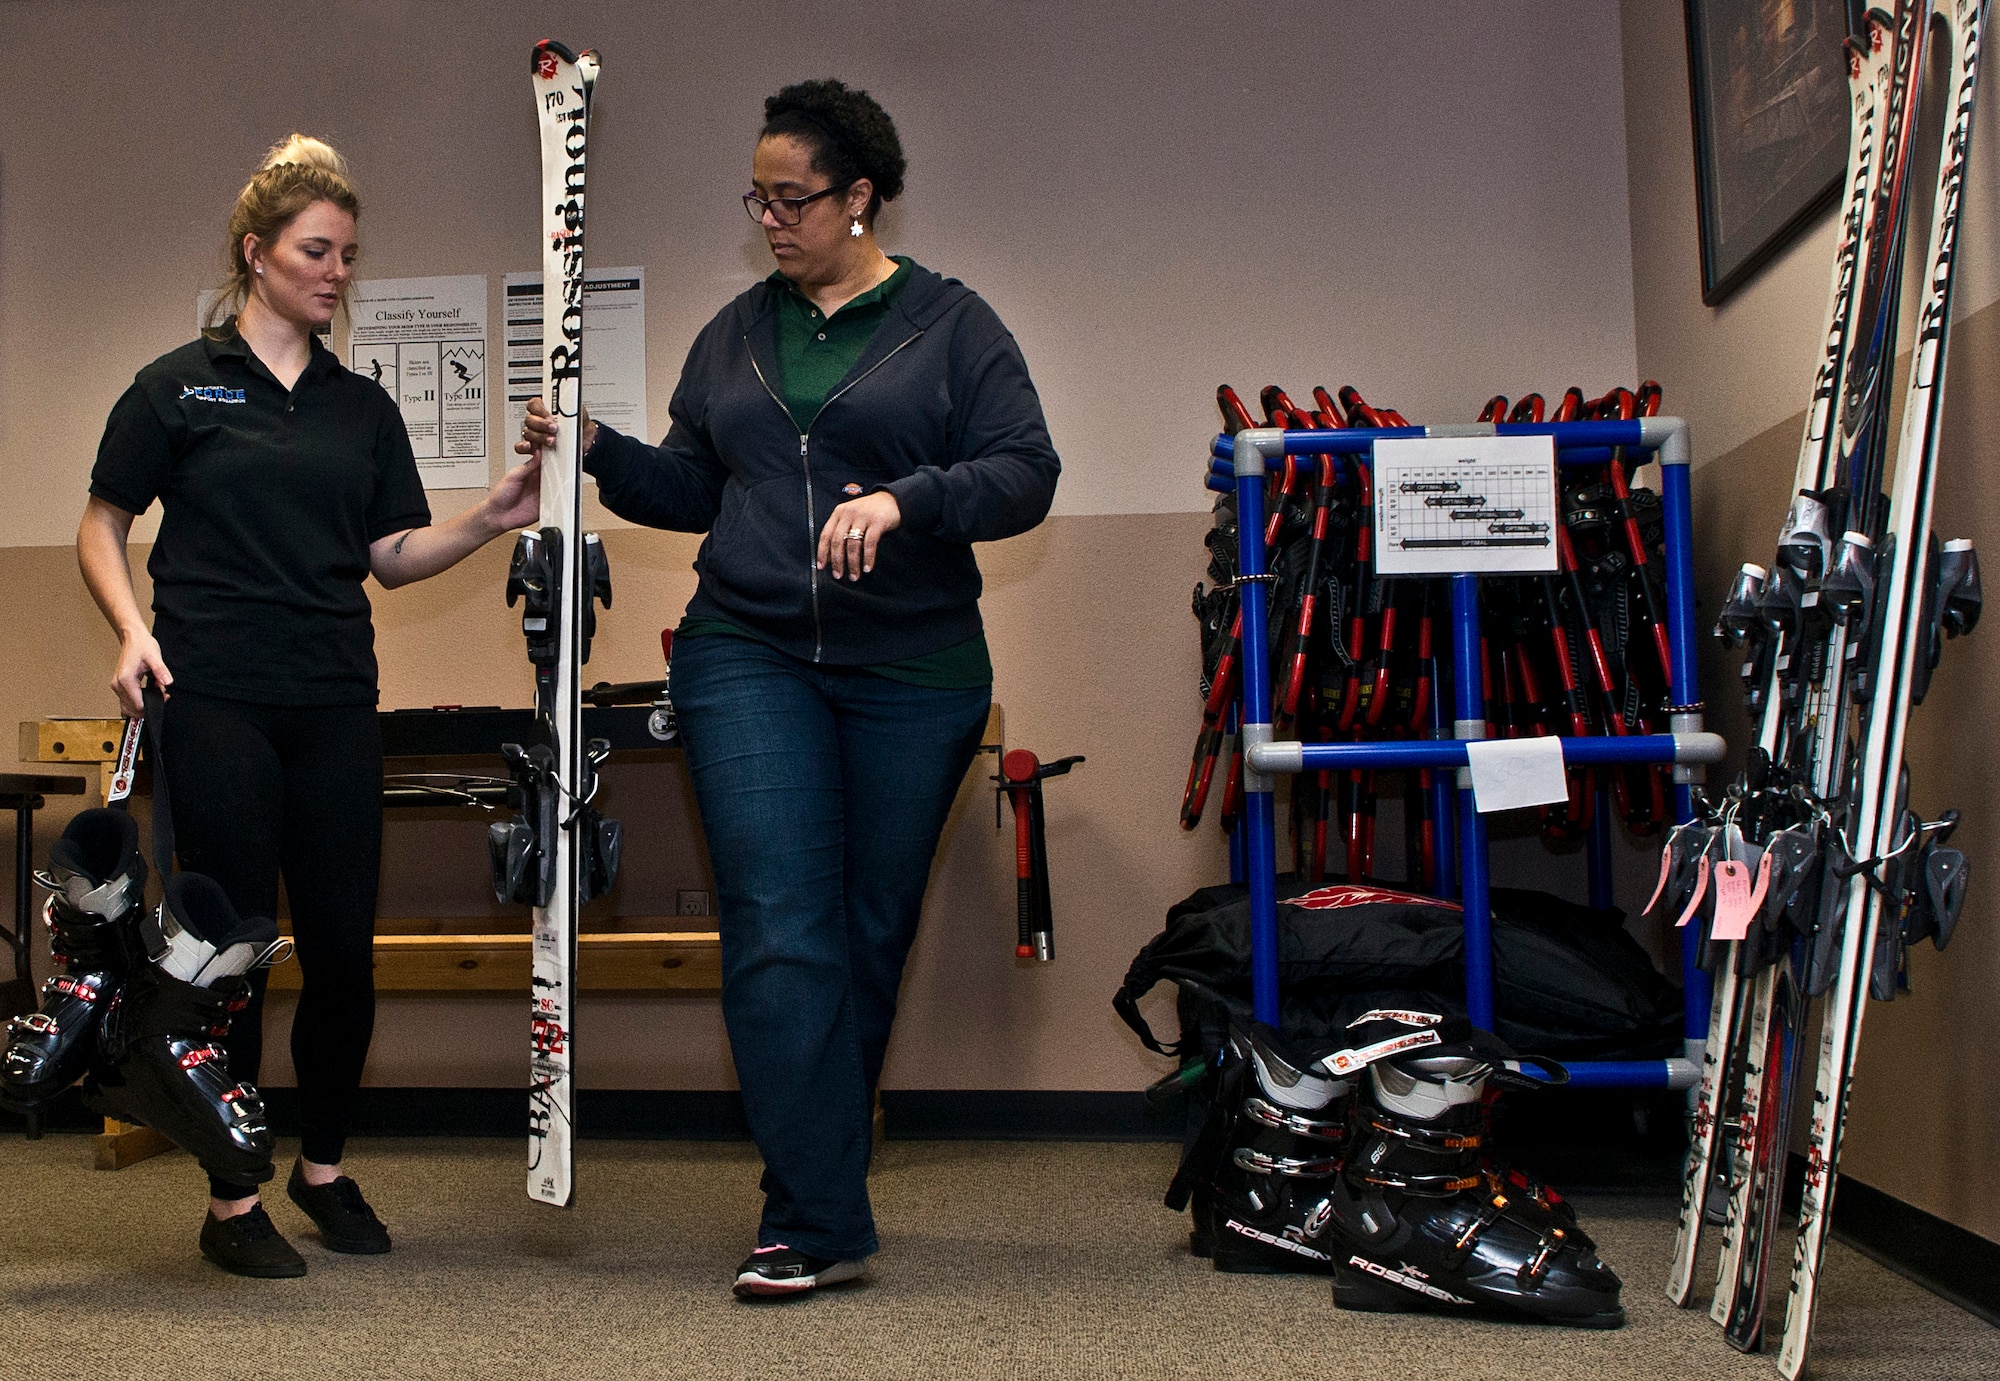 (From left) Ashley Shafer, 5th Force Support Squadron Outdoor Recreation aid, and Dana Sharrit, 5 FSS Outdoor Recreation associate, finish calibrating skis at Minot Air Force Base, N.D., Dec. 2, 2016. Outdoor Rec. is an organization that gives Airmen and their families the opportunity to experience North Dakota events like skiing, snowboarding and dog sledding. (U.S. Air Force photo/Airman 1st Class Jonathan McElderry)